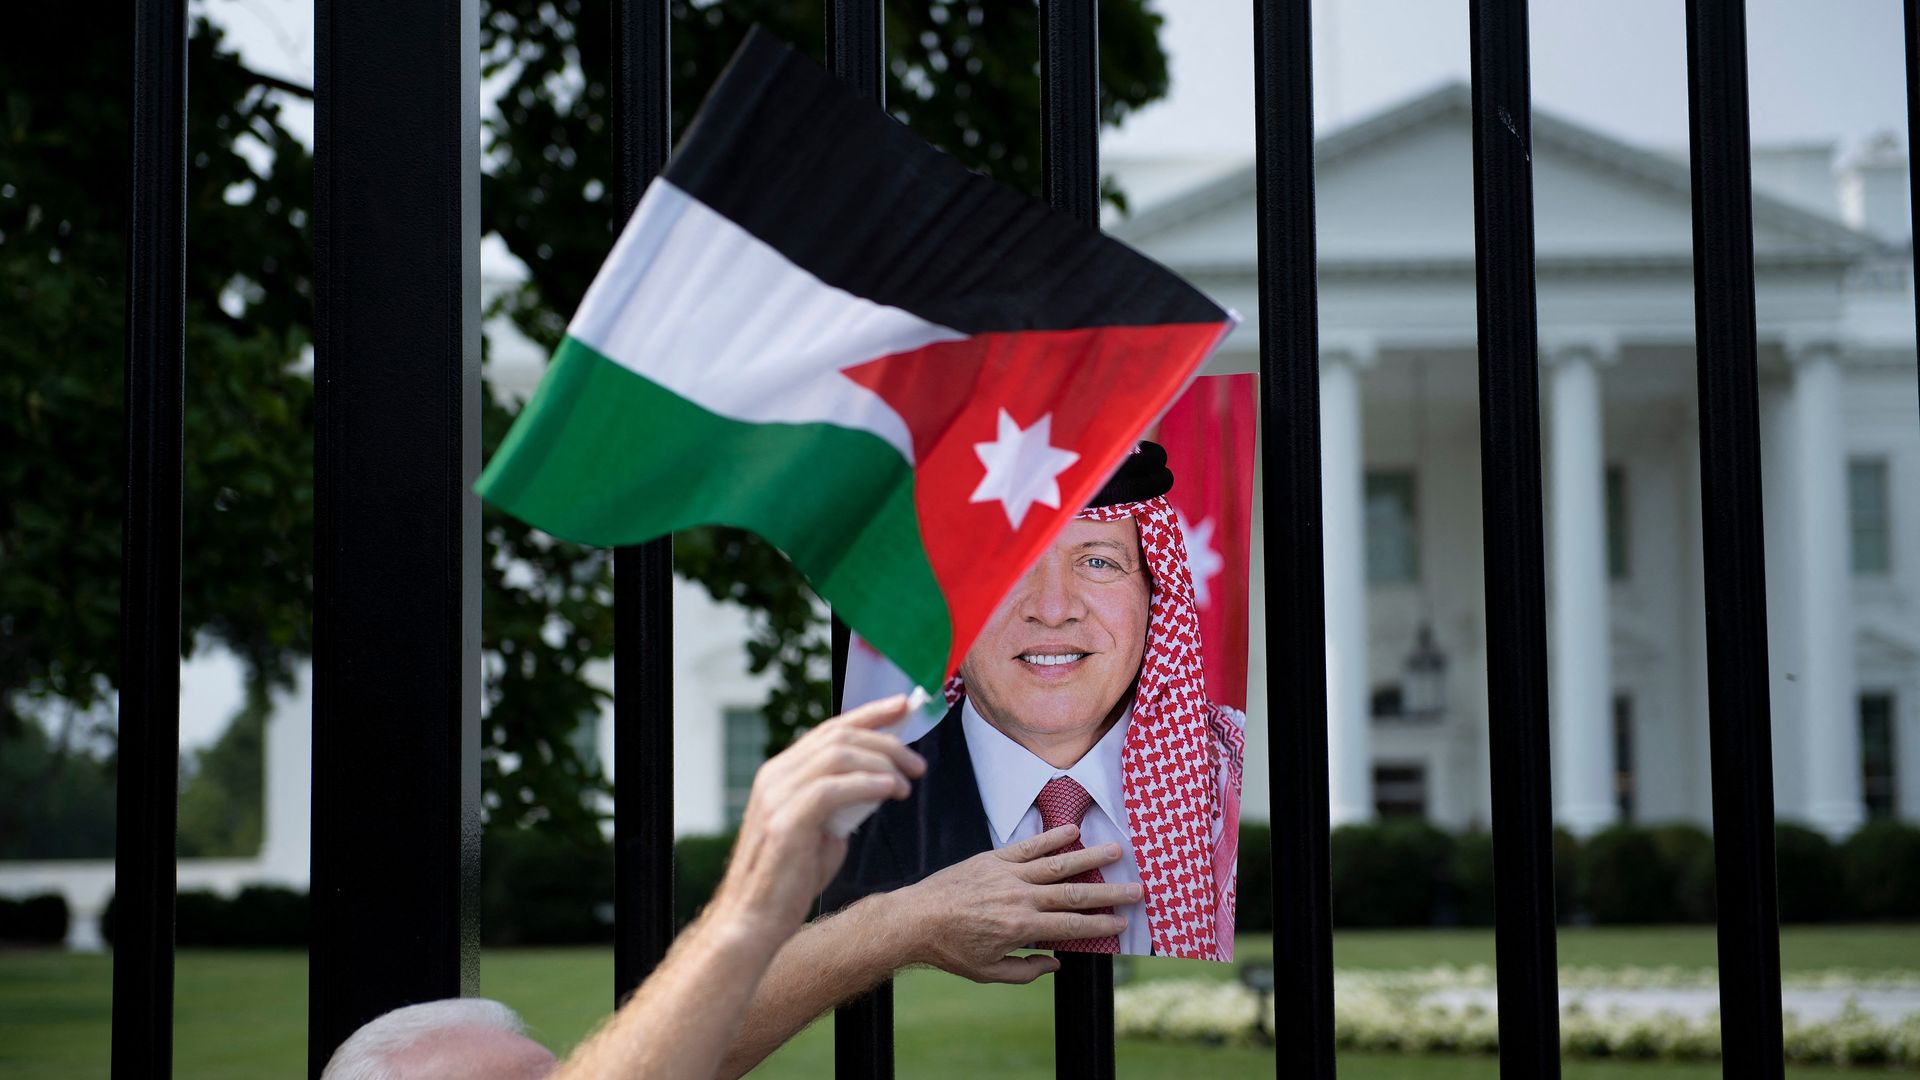 A supporter of Jordan's King Abdullah II is seen holding his photo outside the White House.